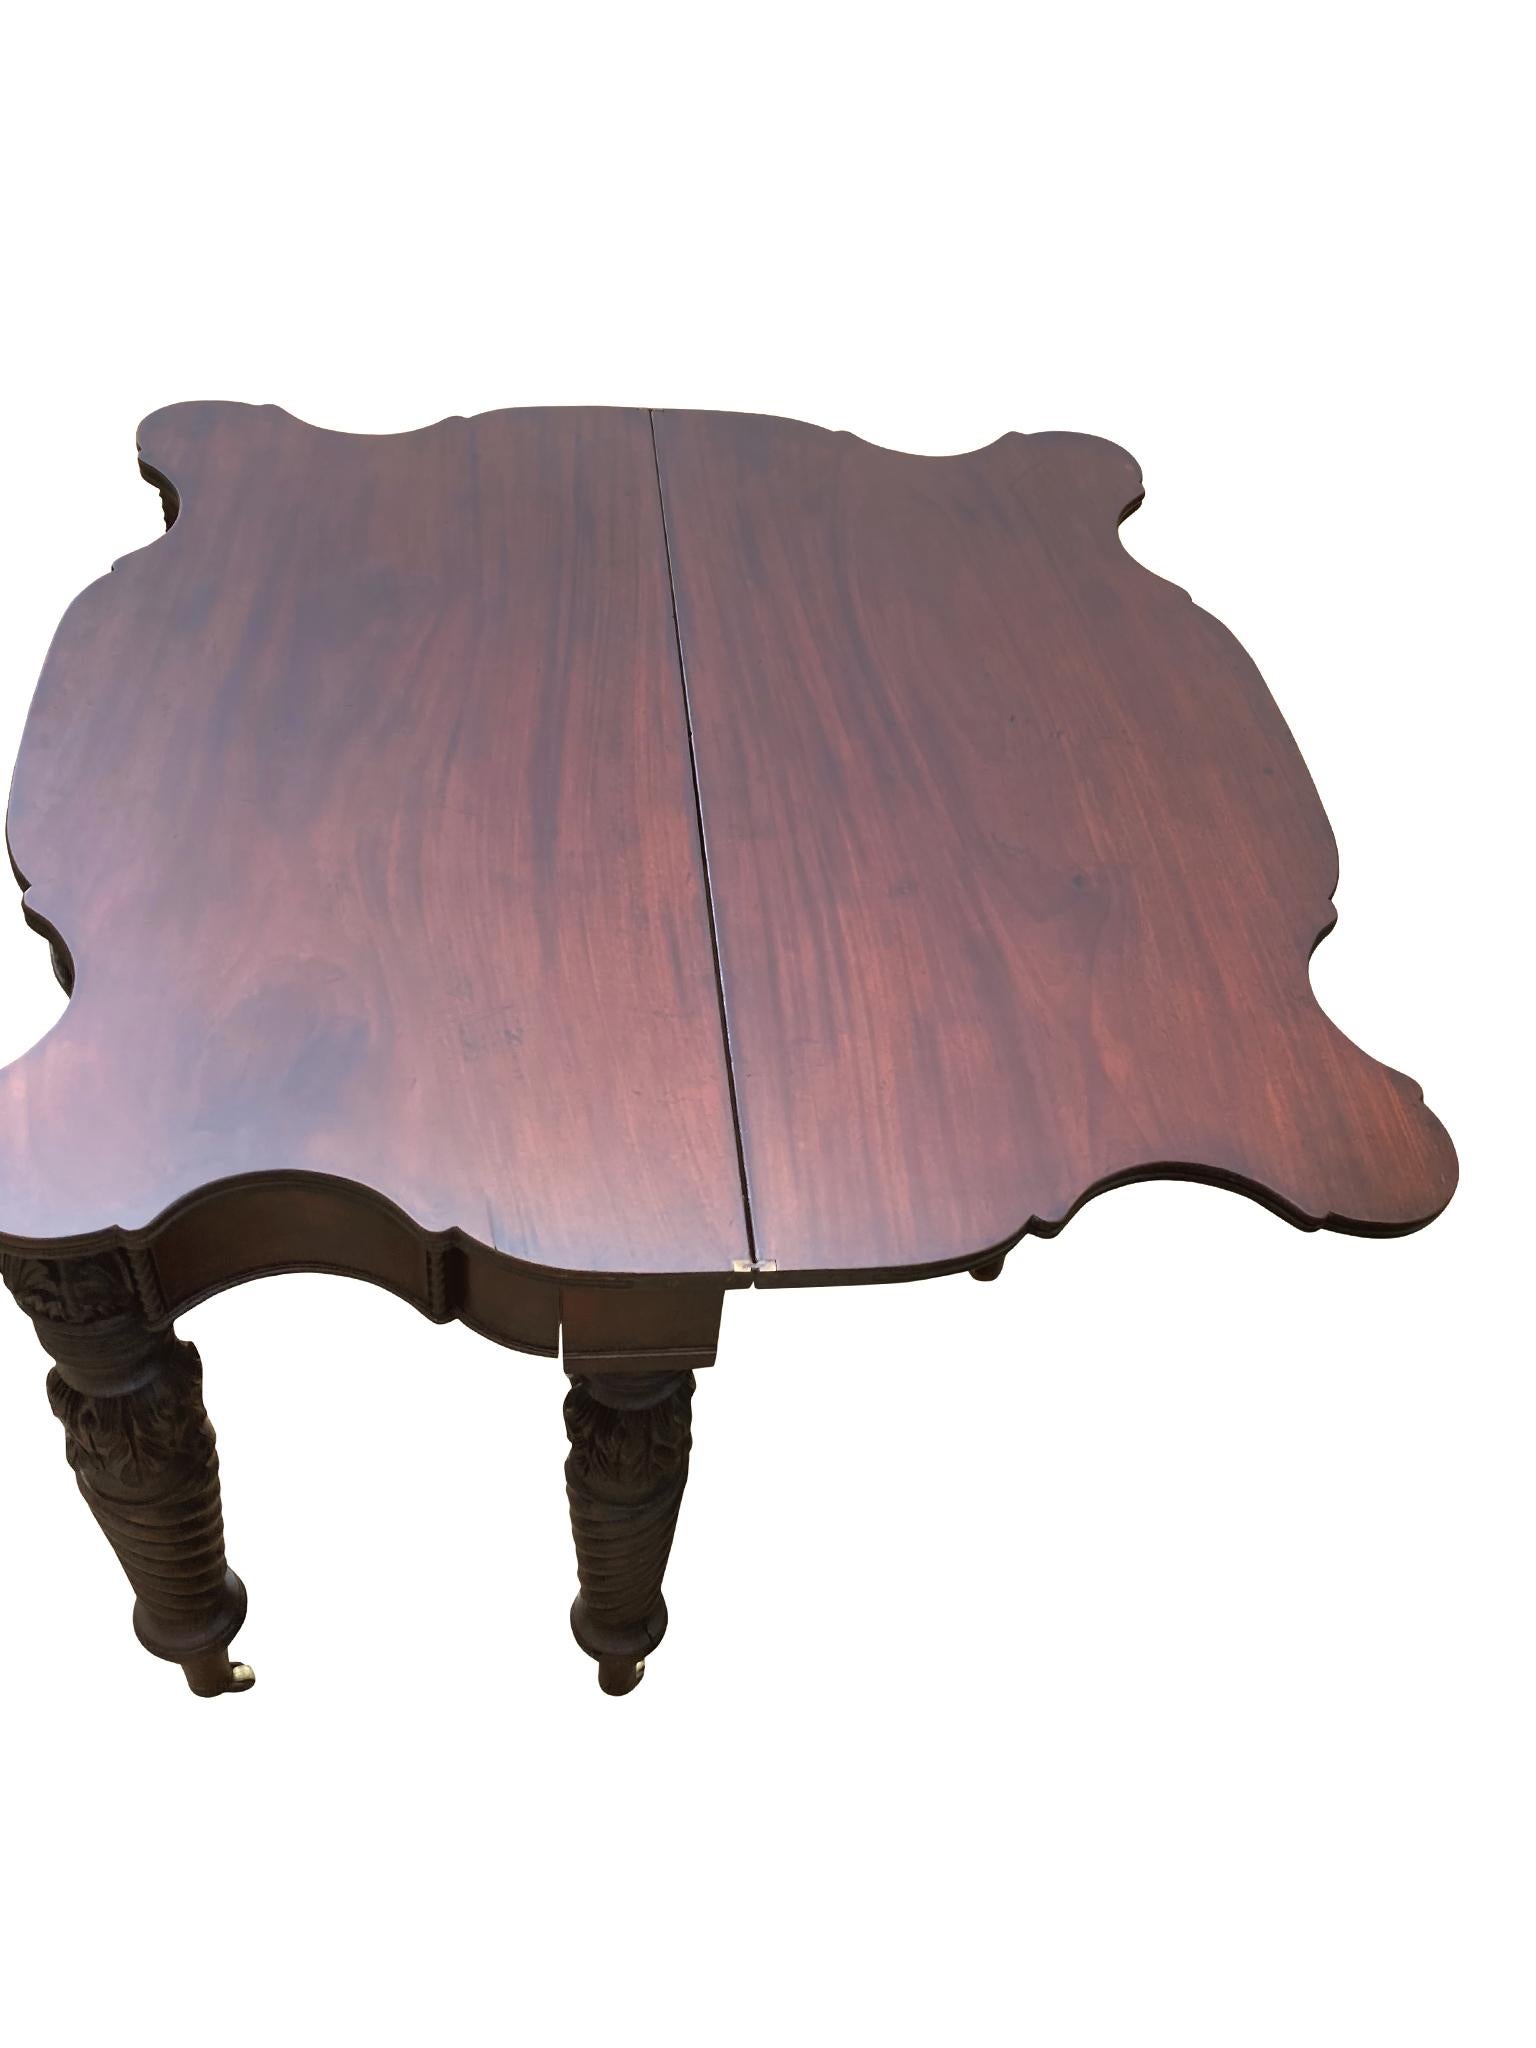 Near-Pair Set of American Federal Card Tables For Sale 7